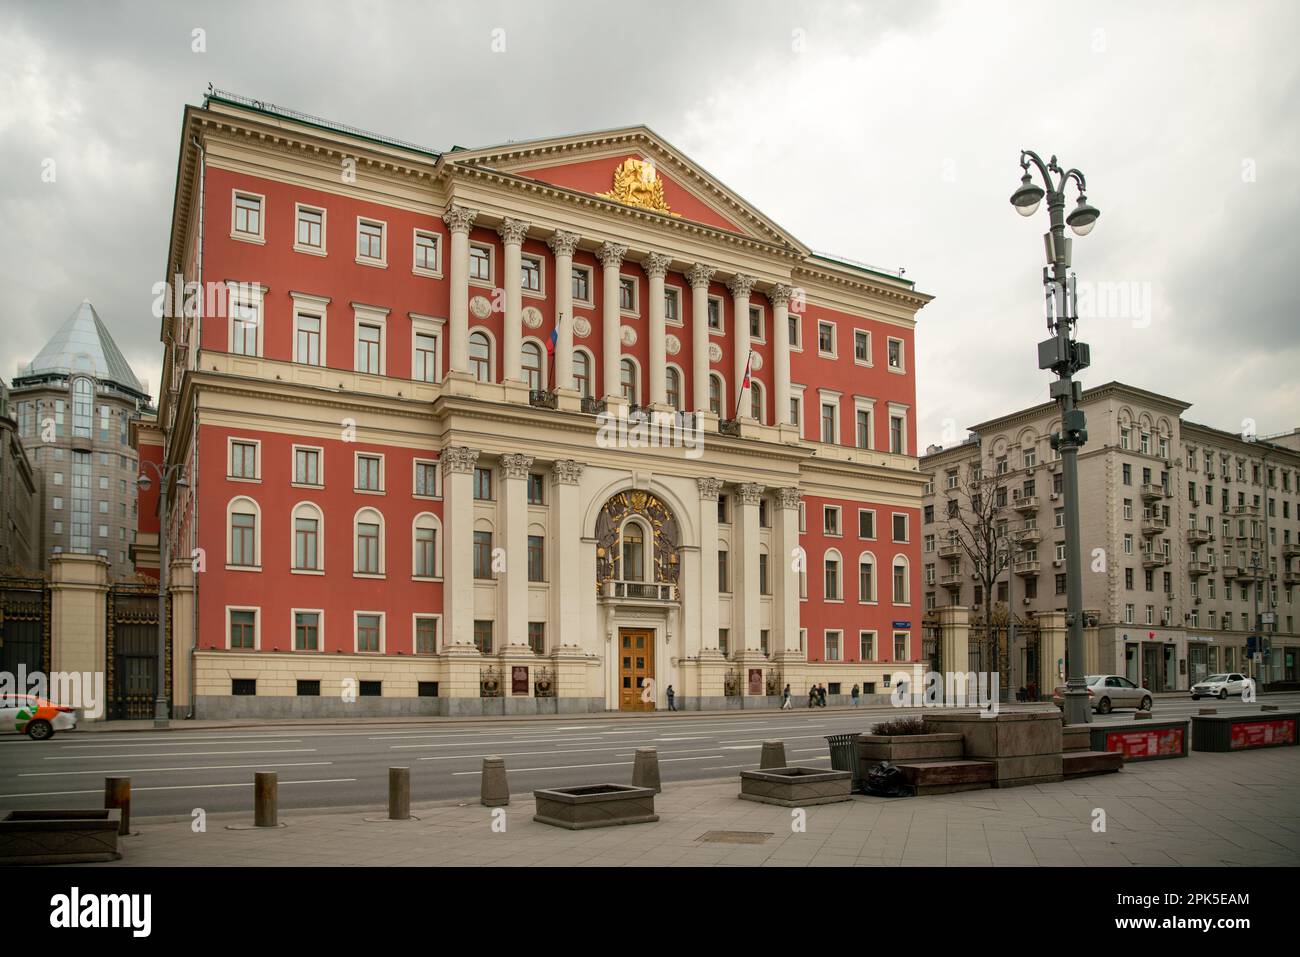 Building of Moscow Mairie of the Moscow mayor's office(Golitsin;shouse) is a building located on Tversakaya 13.. It was built in 1782 according to the Stock Photo